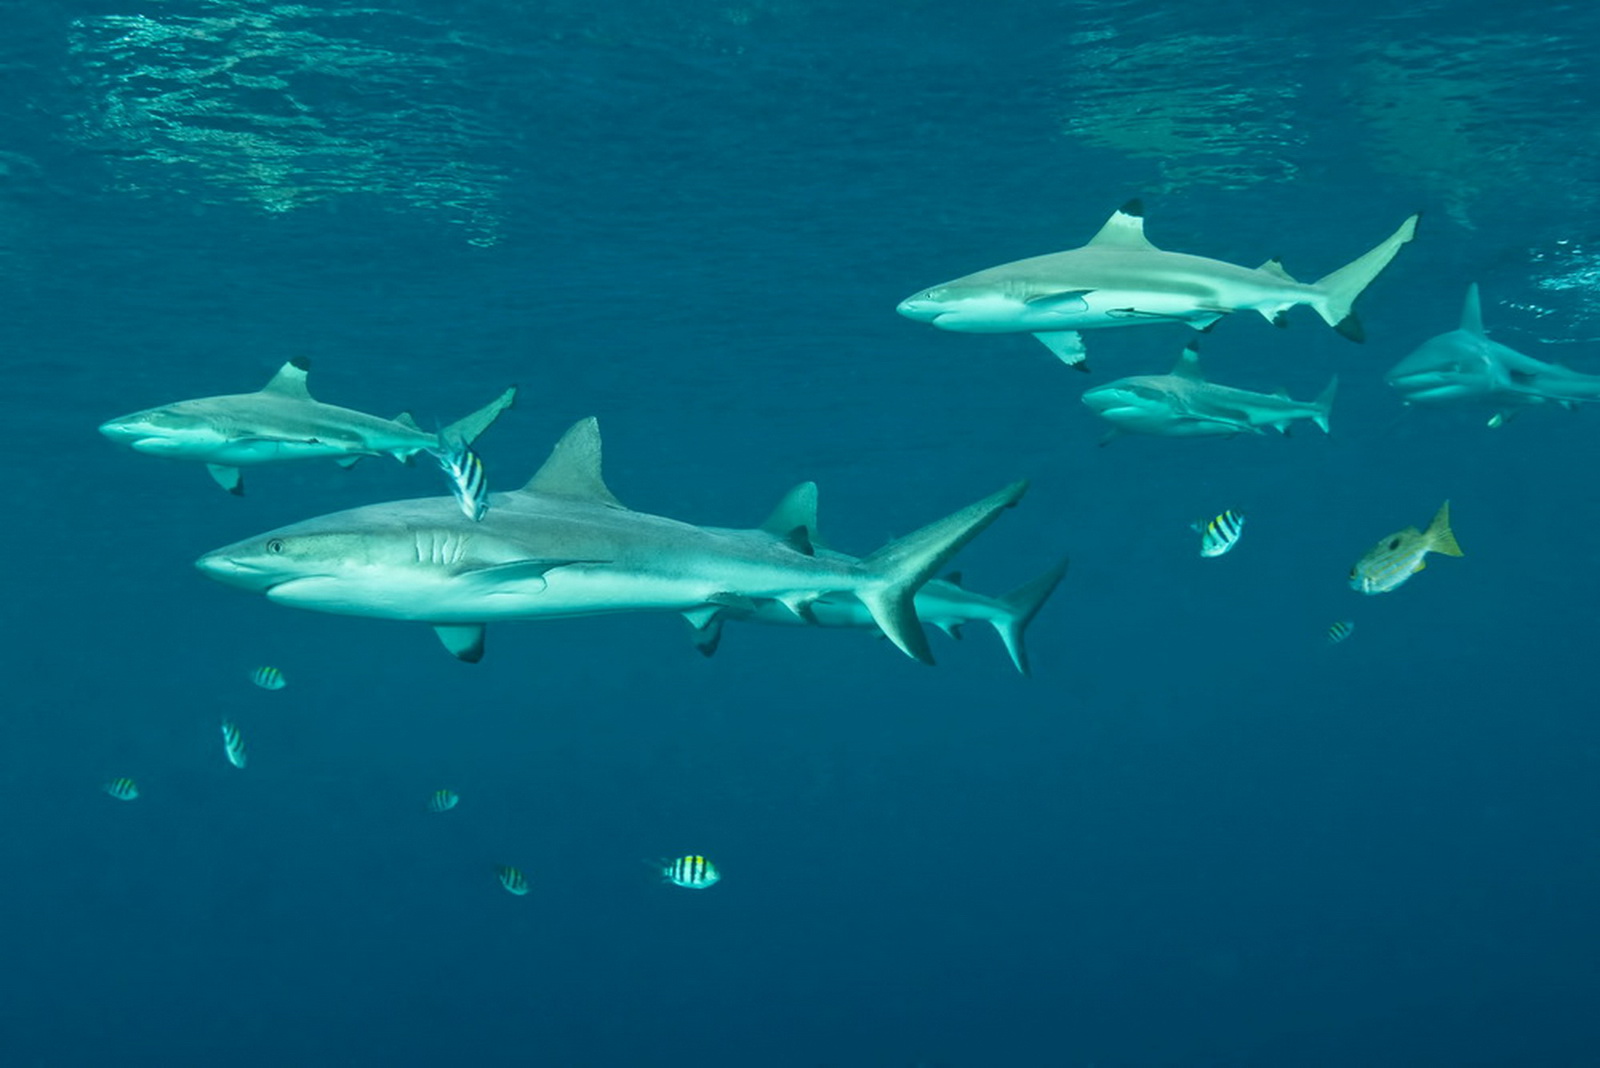 sharks-at-the-welcome-jetty-at-uepi-island-2_1600.jpg